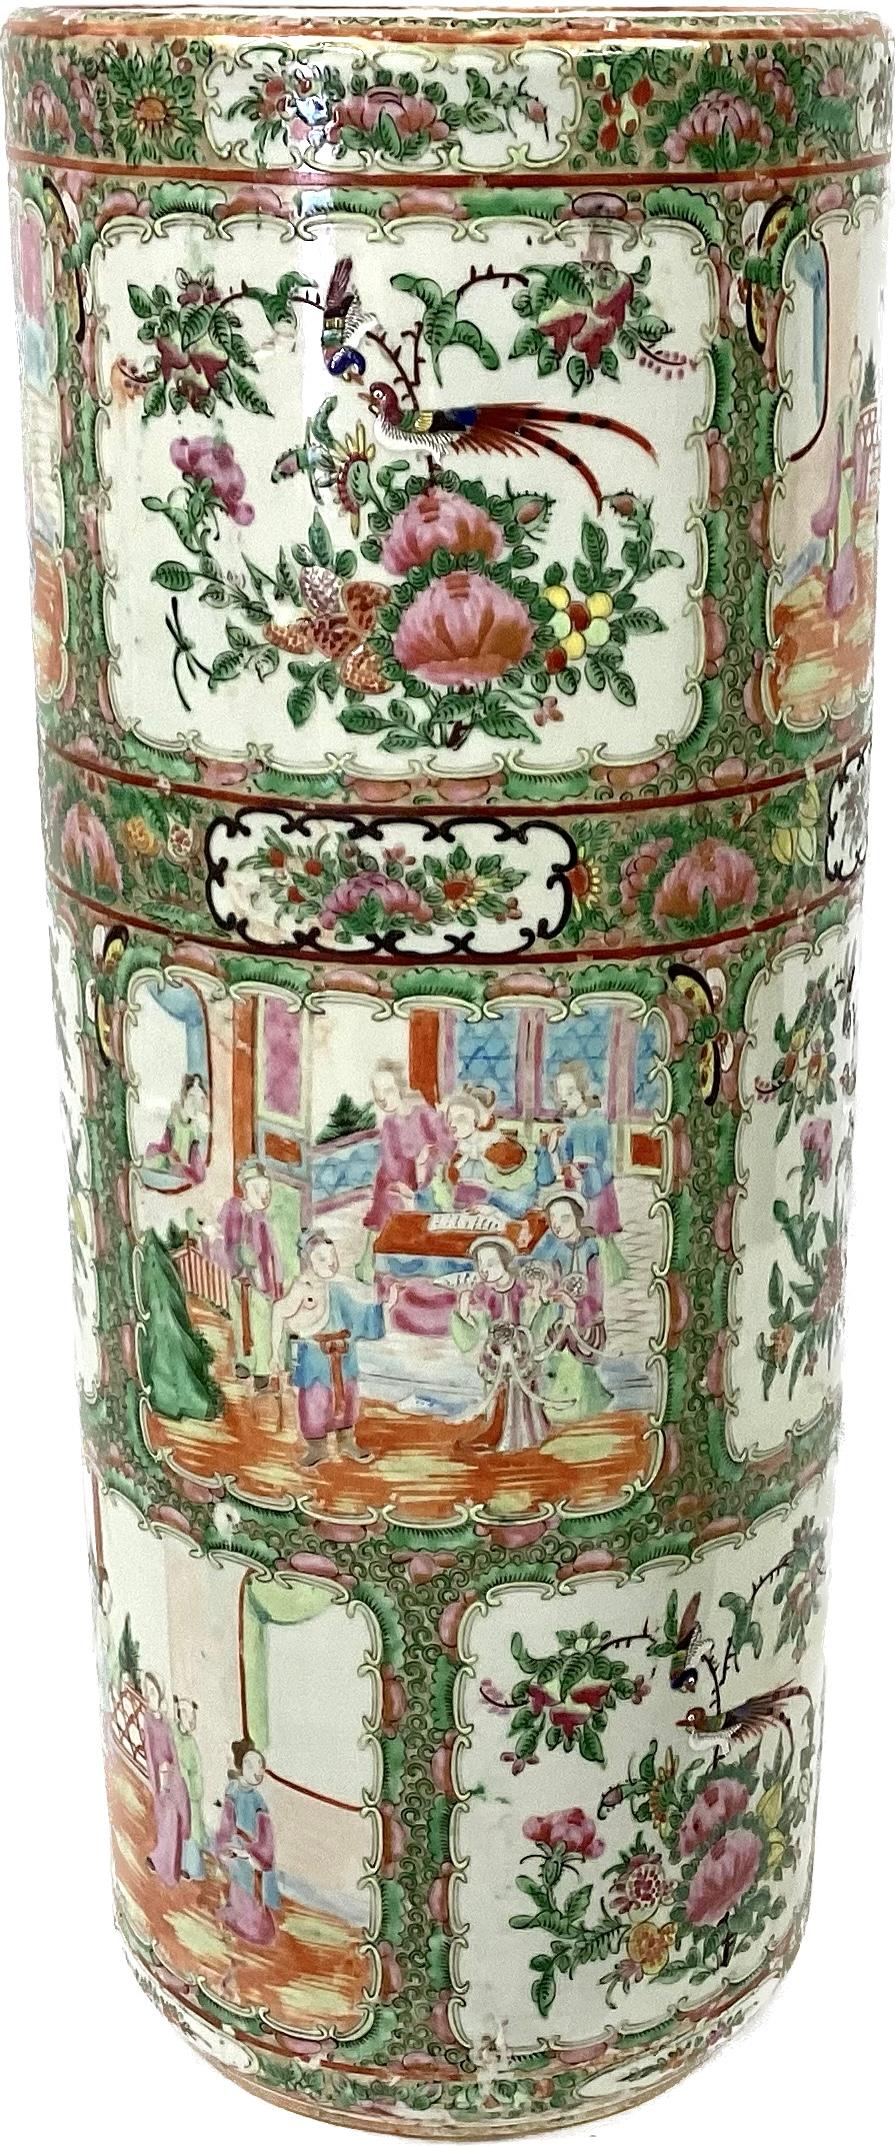 Antique 19th Century Chinese rose medallion umbrella stand. Vibrant floral and figures in colors of pink, red, green, etc. on a white background. 